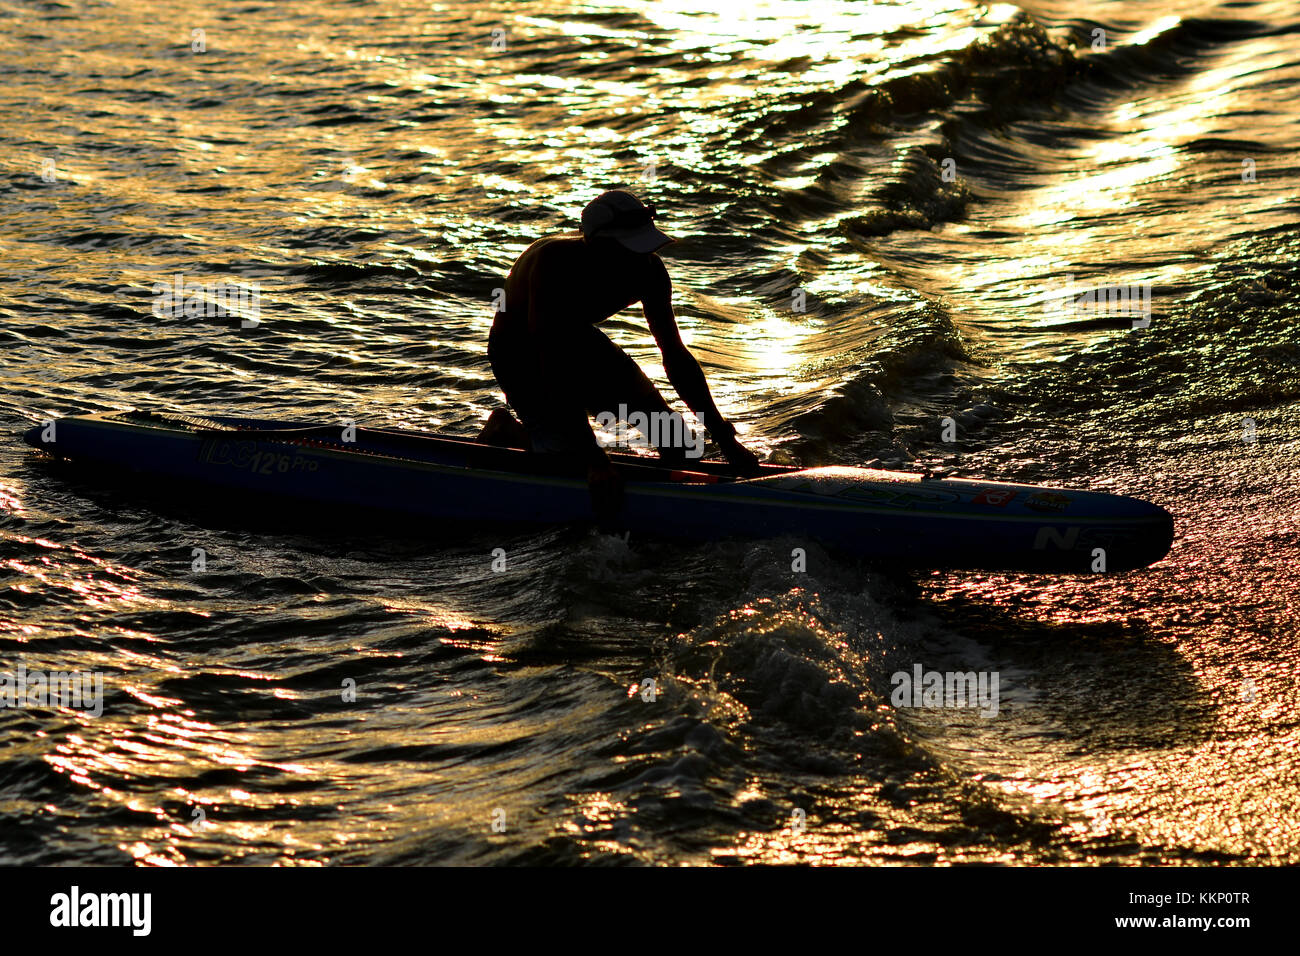 Le Stand Up Paddle Surf et Stand Up Paddle (SUP) Banque D'Images